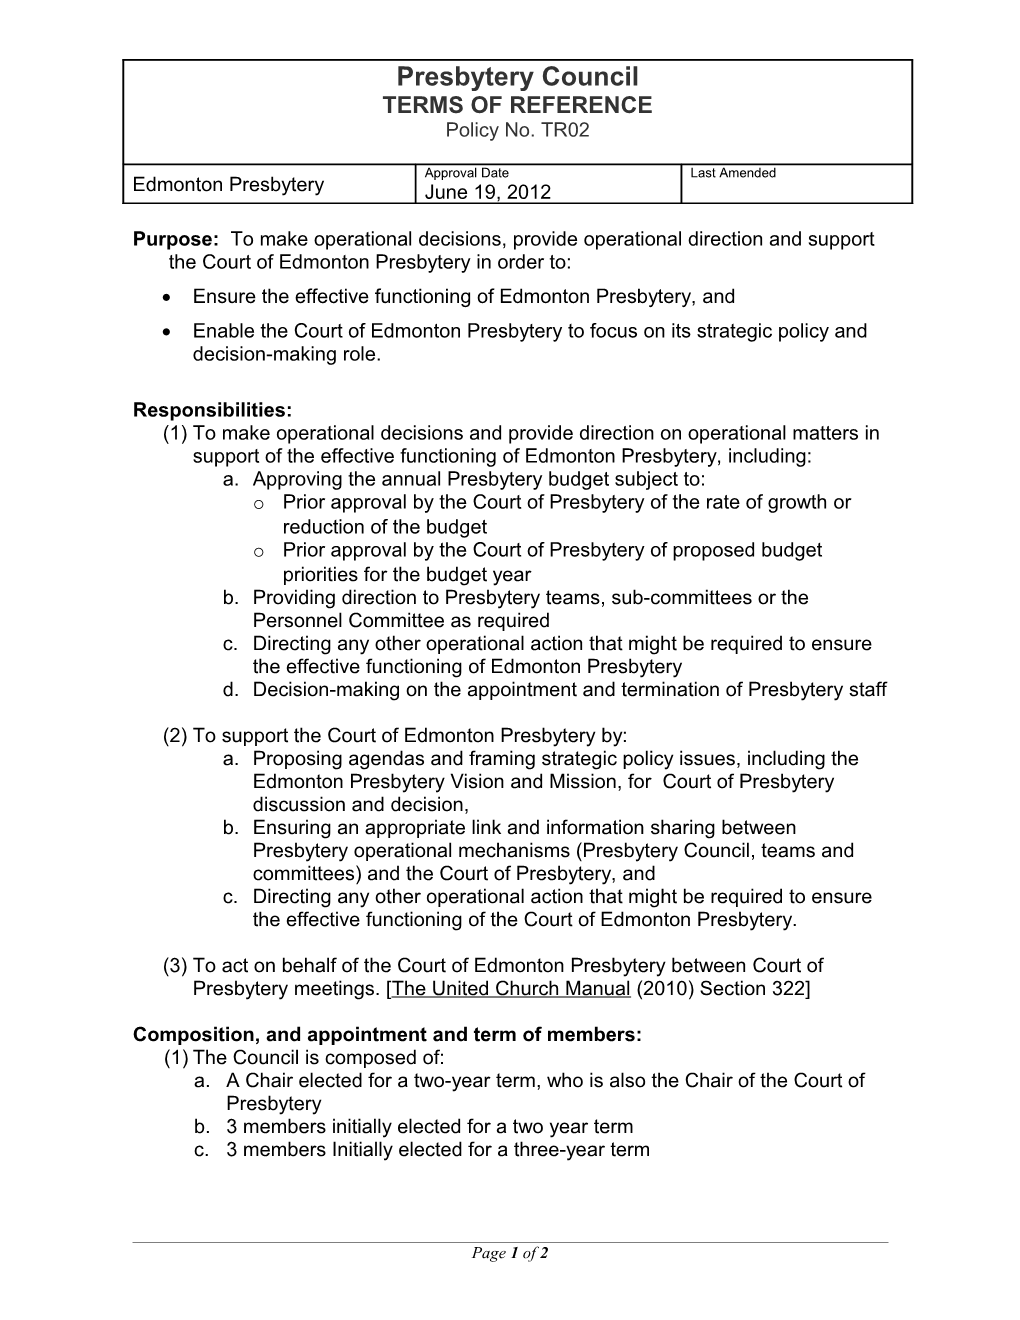 Terms of Reference TR02 Presbytery Council